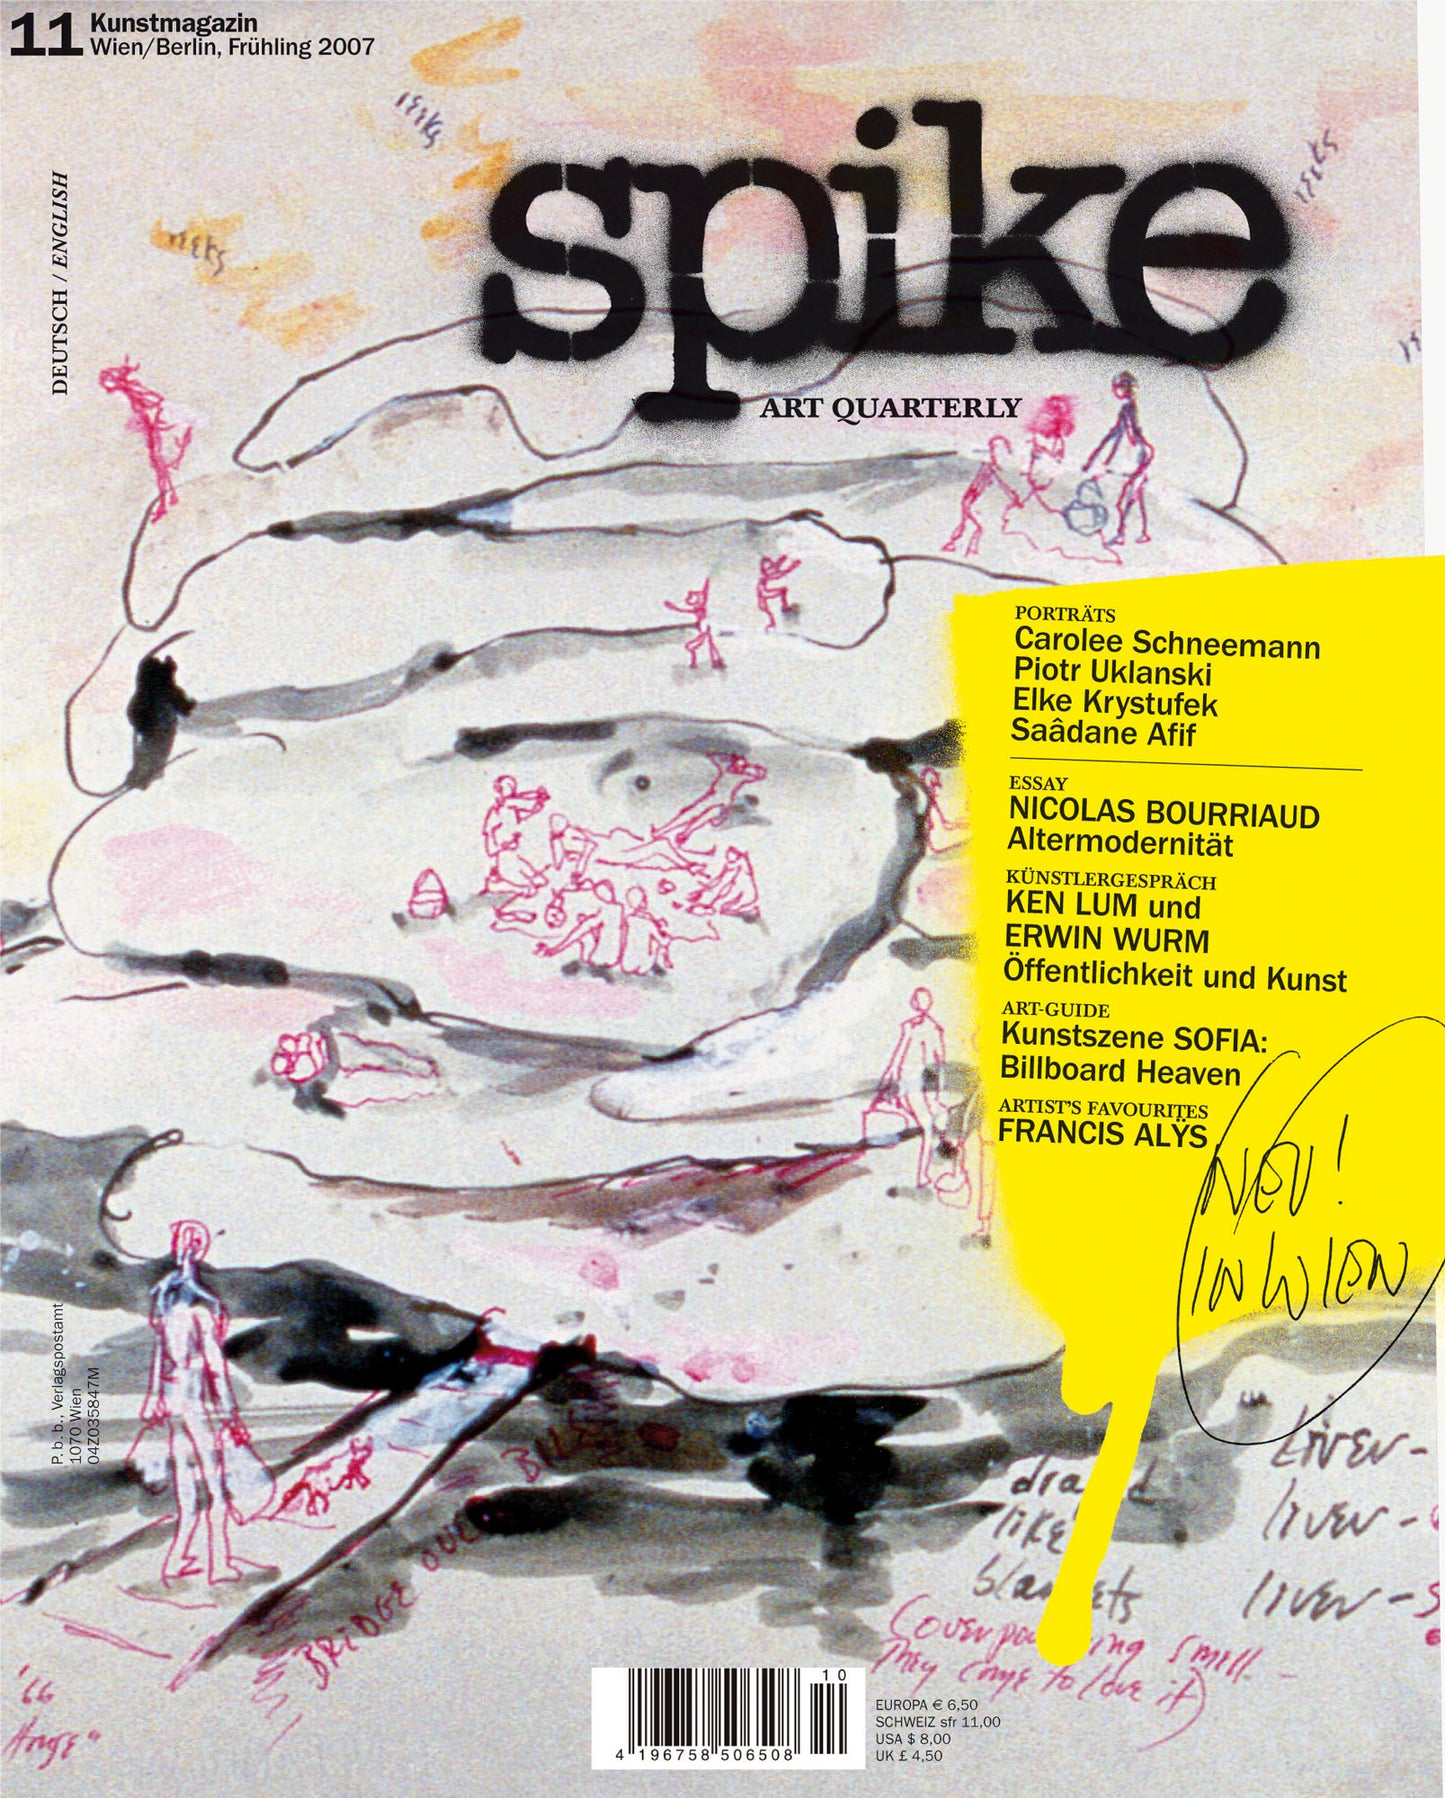 ISSUE 11 (SPRING 2007)